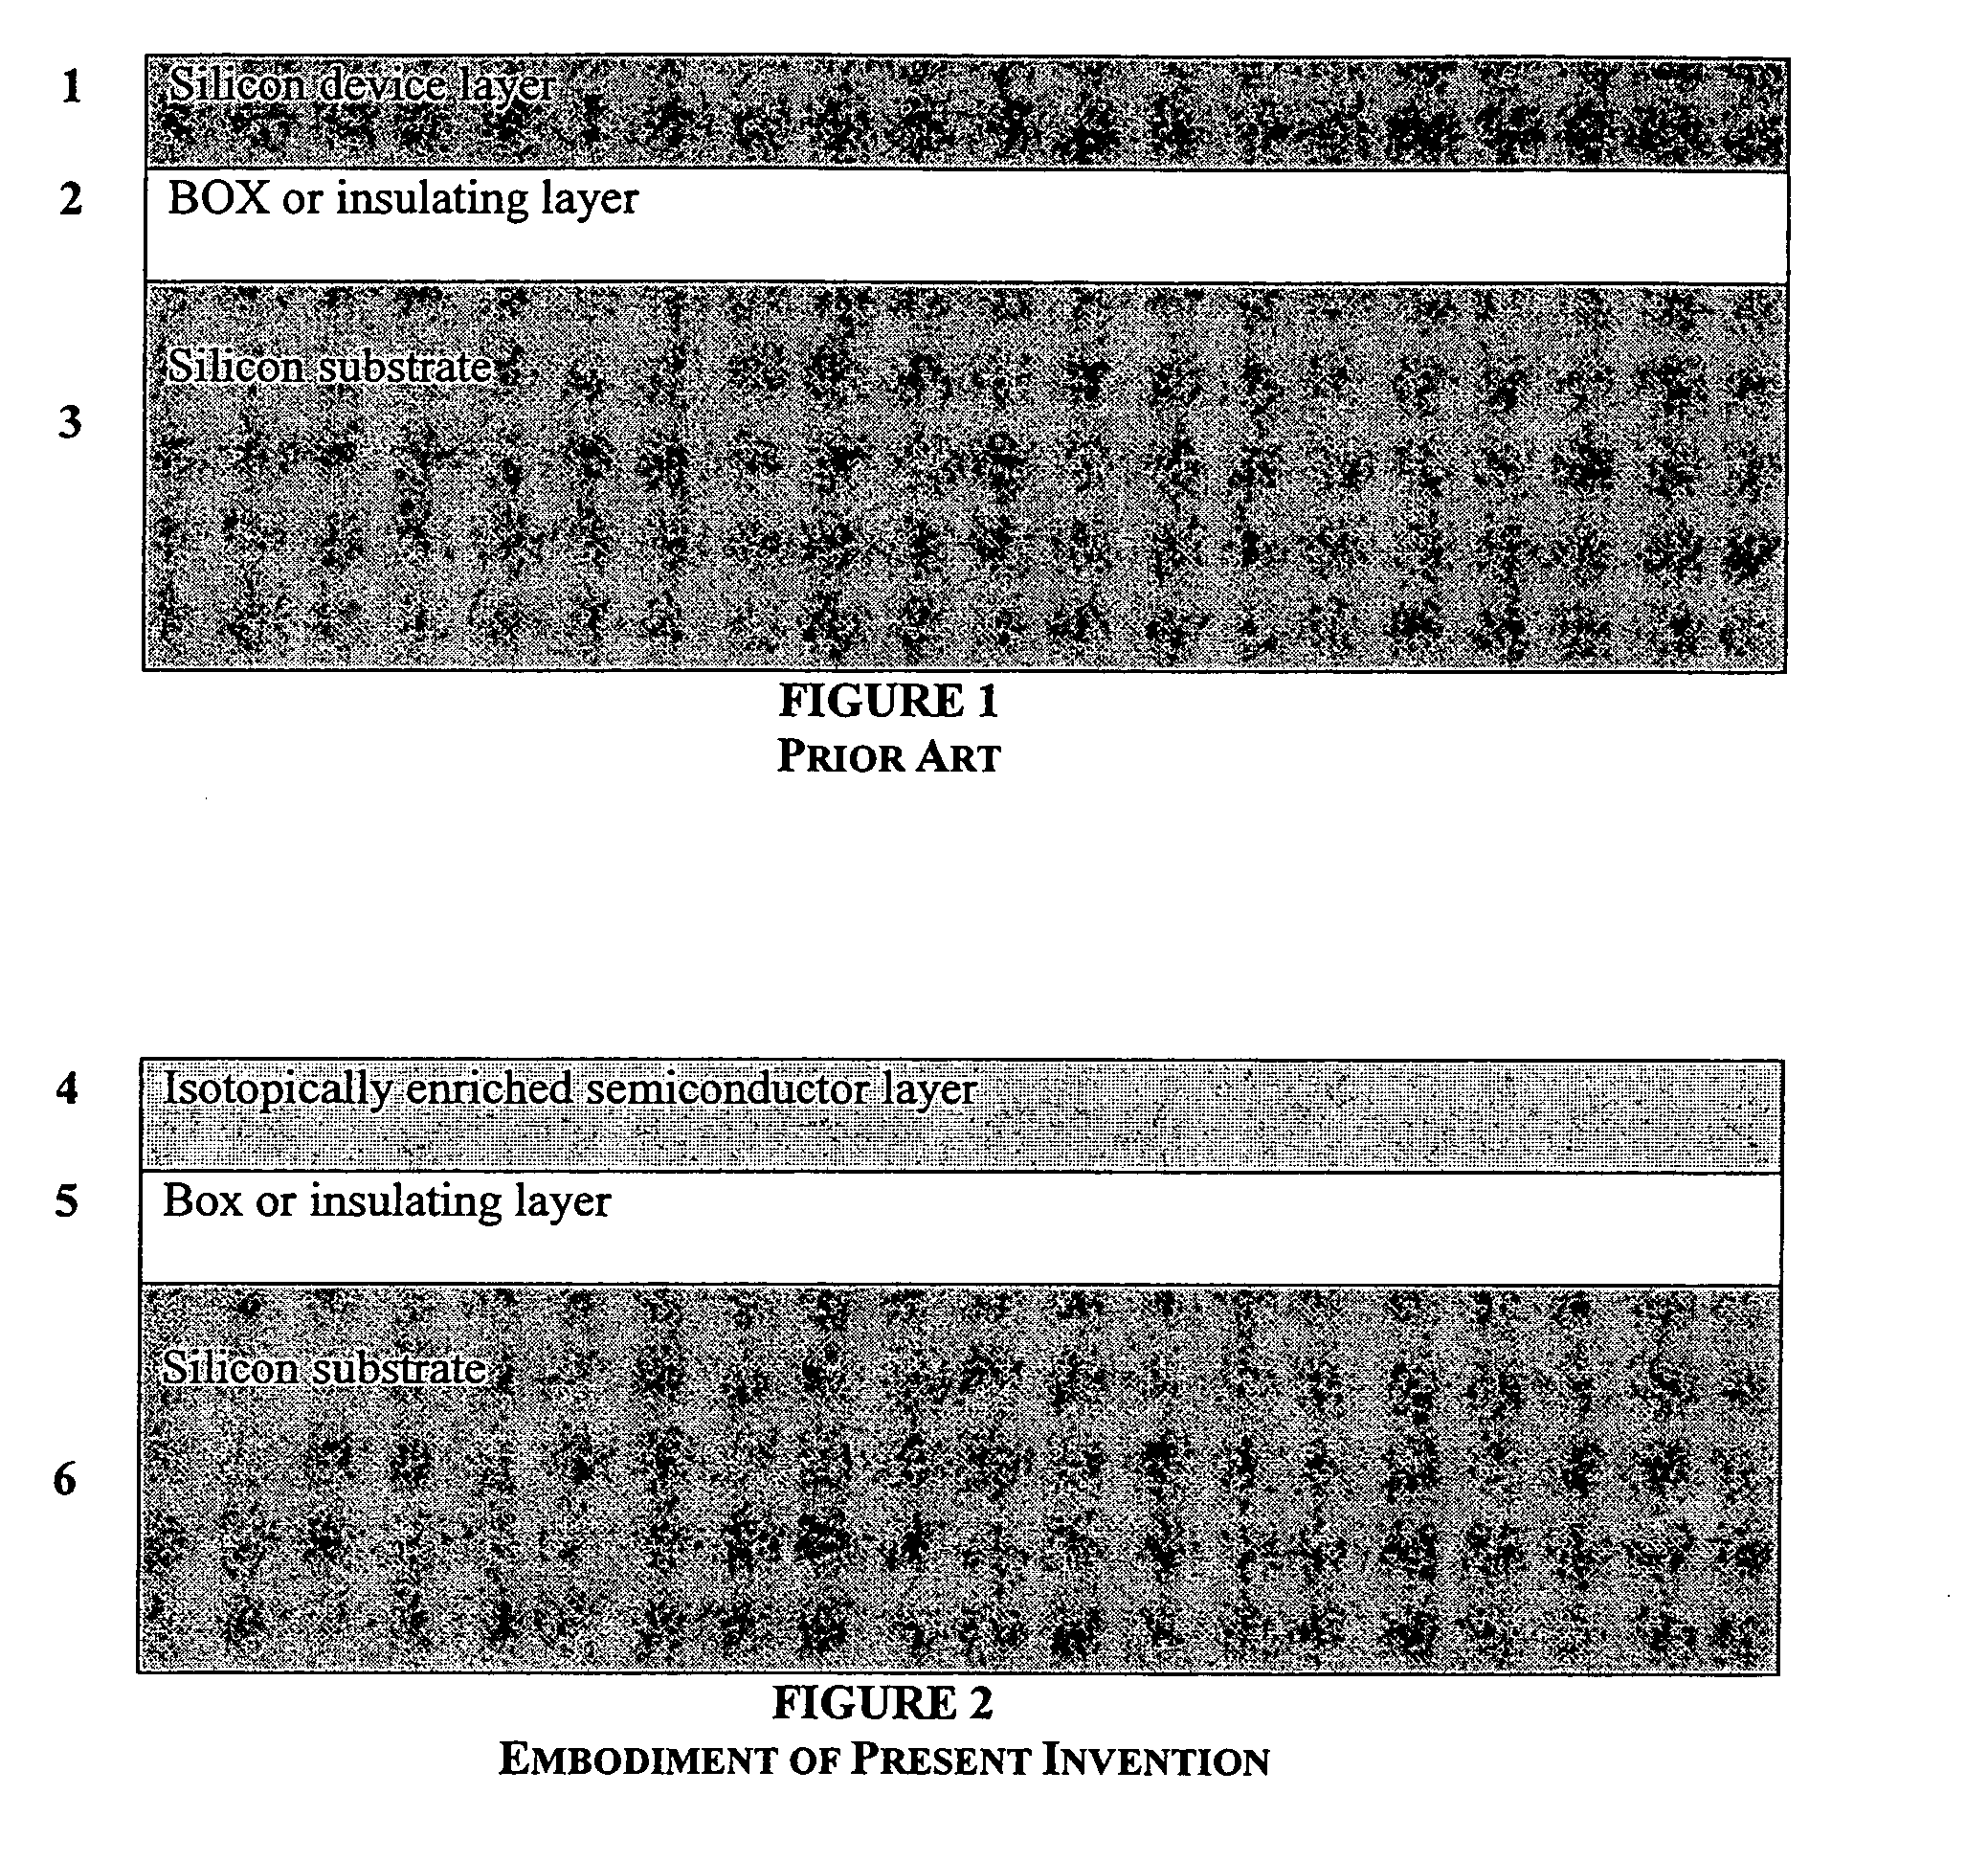 Isotopically pure silicon-on-insulator wafers and method of making same